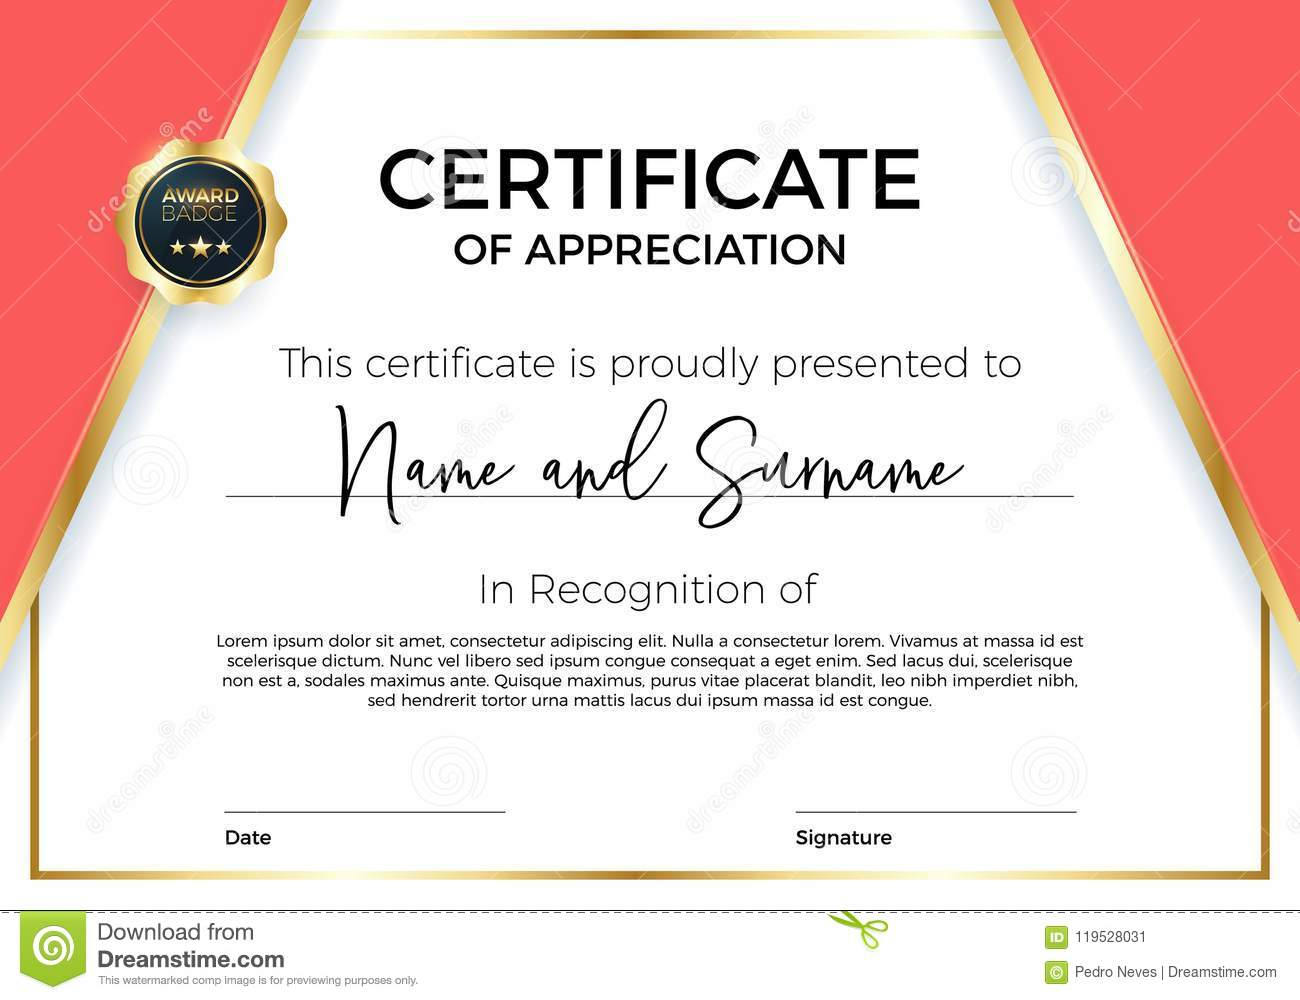 Certificate Of Appreciation Or Achievement With Award Badge Pertaining To Template For Certificate Of Award